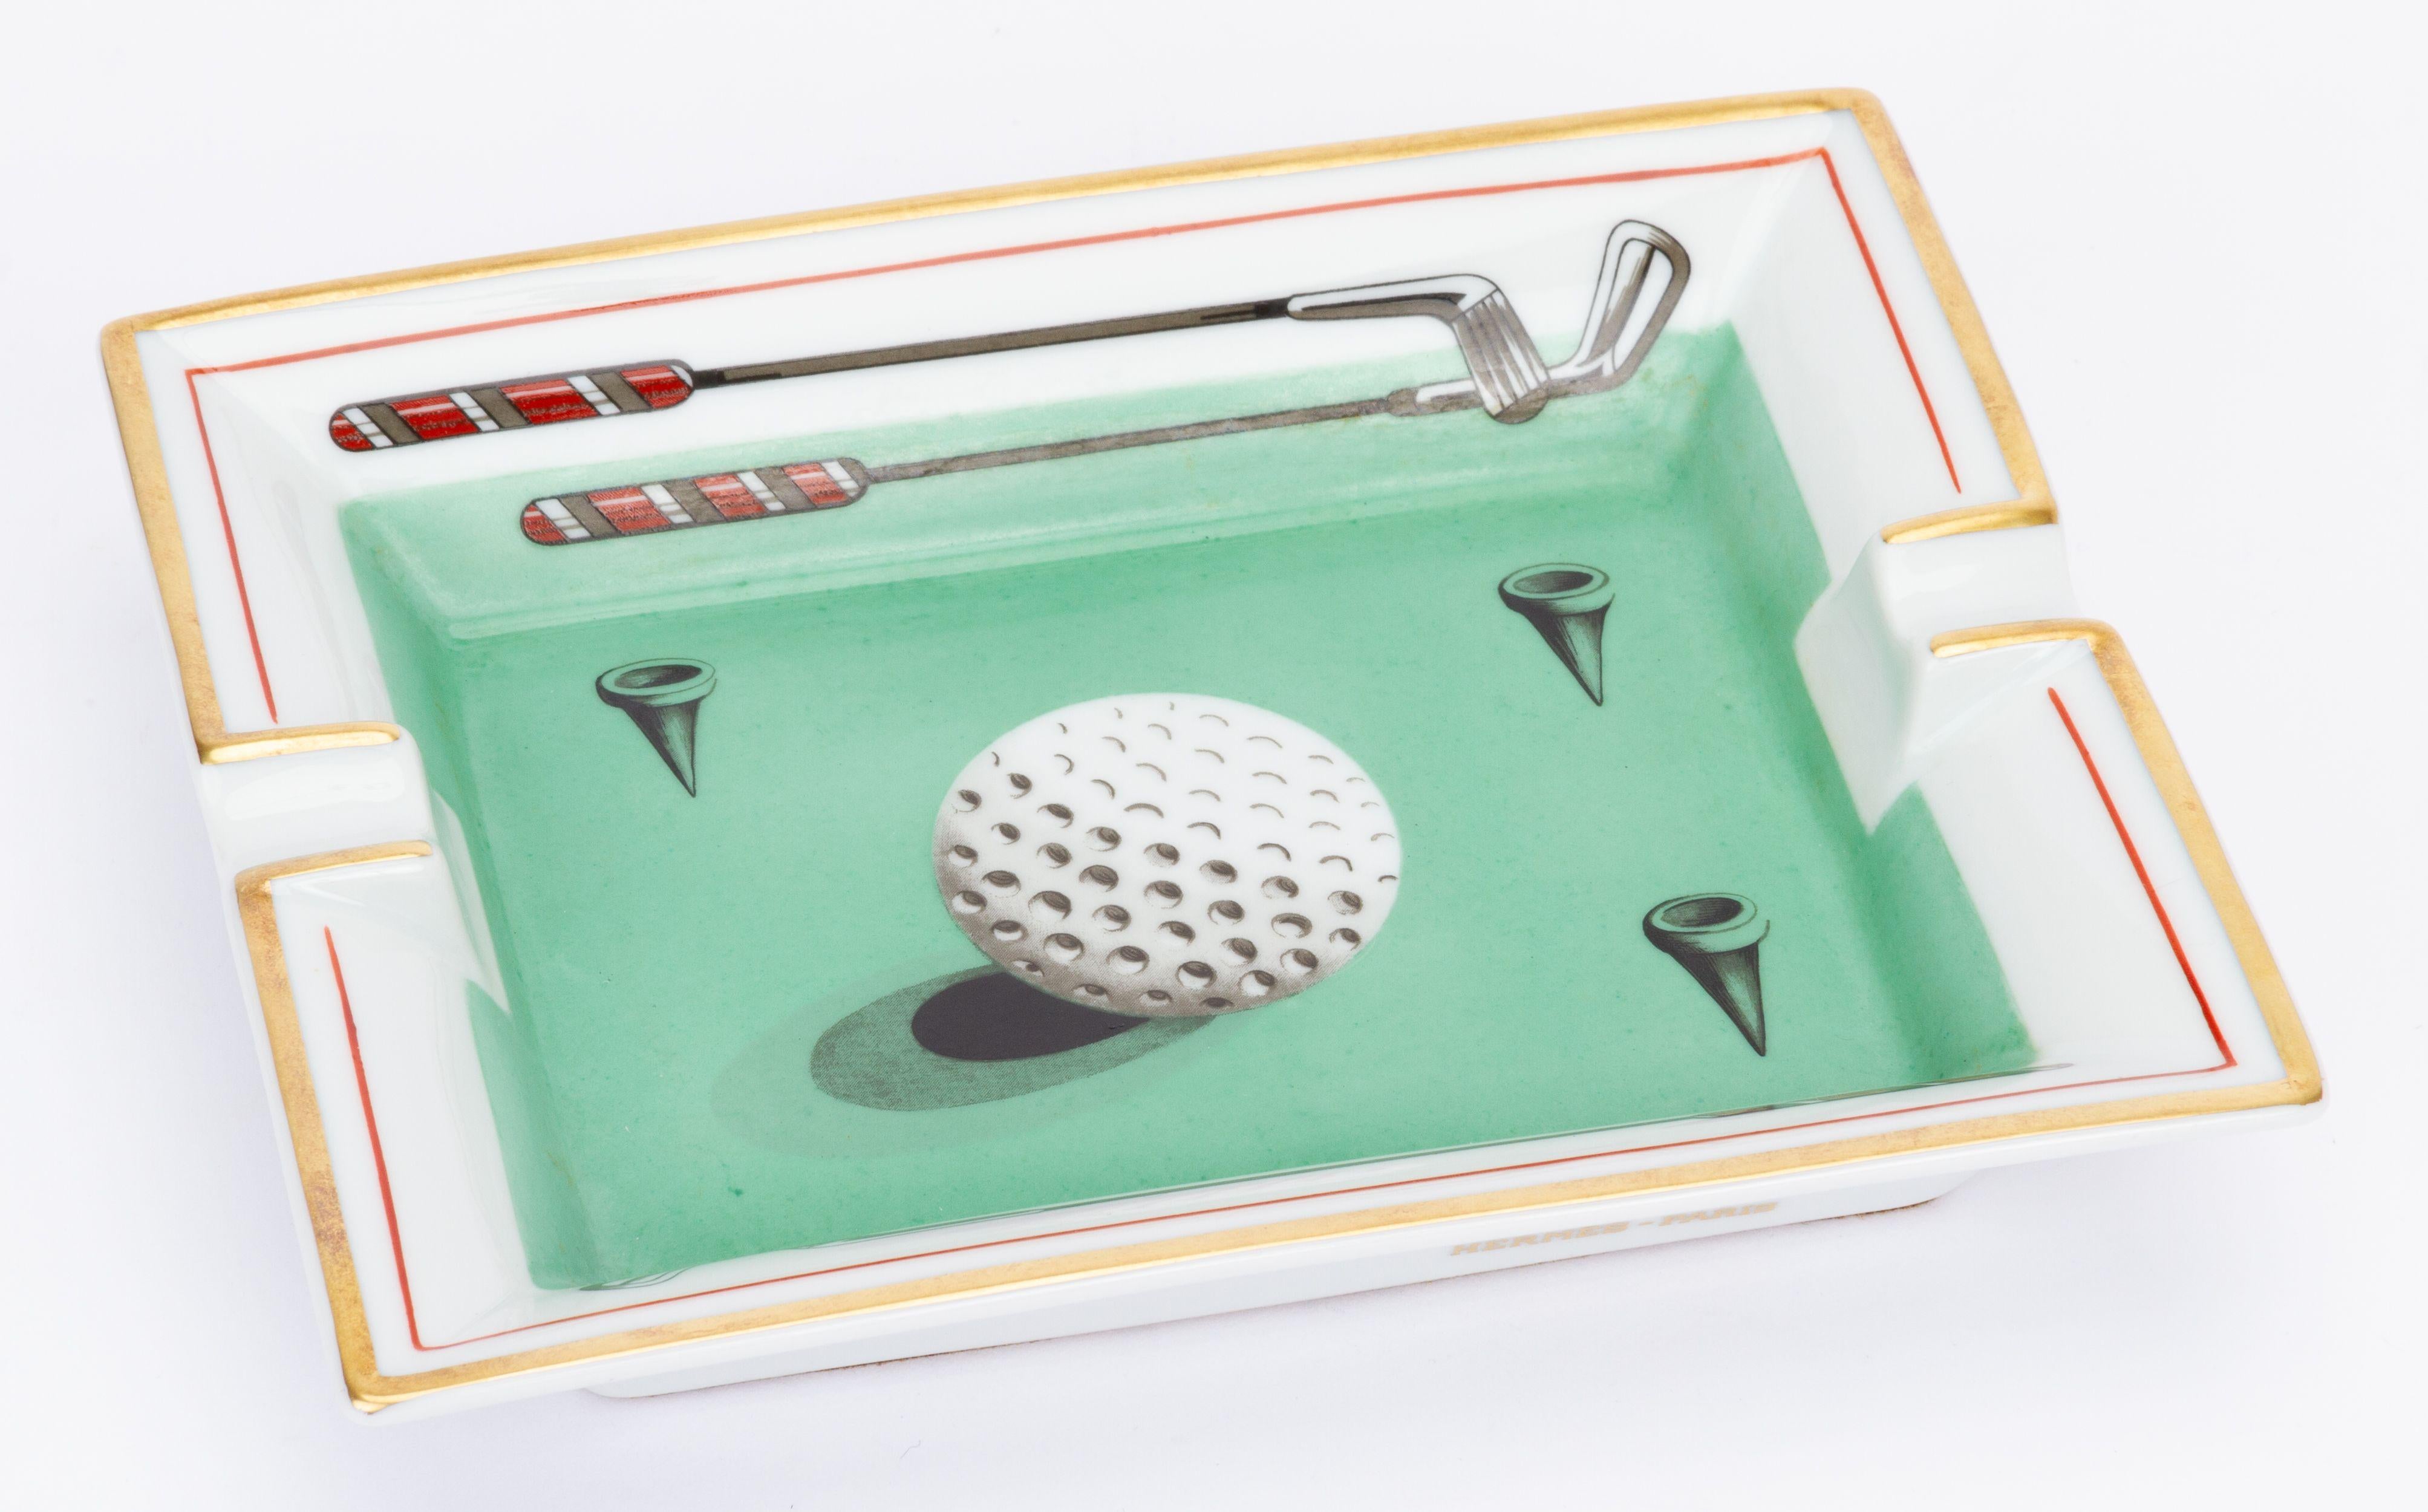 Hermès vintage ashtray in green with a print of a golf ball in the center and surrounded by golf clubs. The piece is in excellent condition.